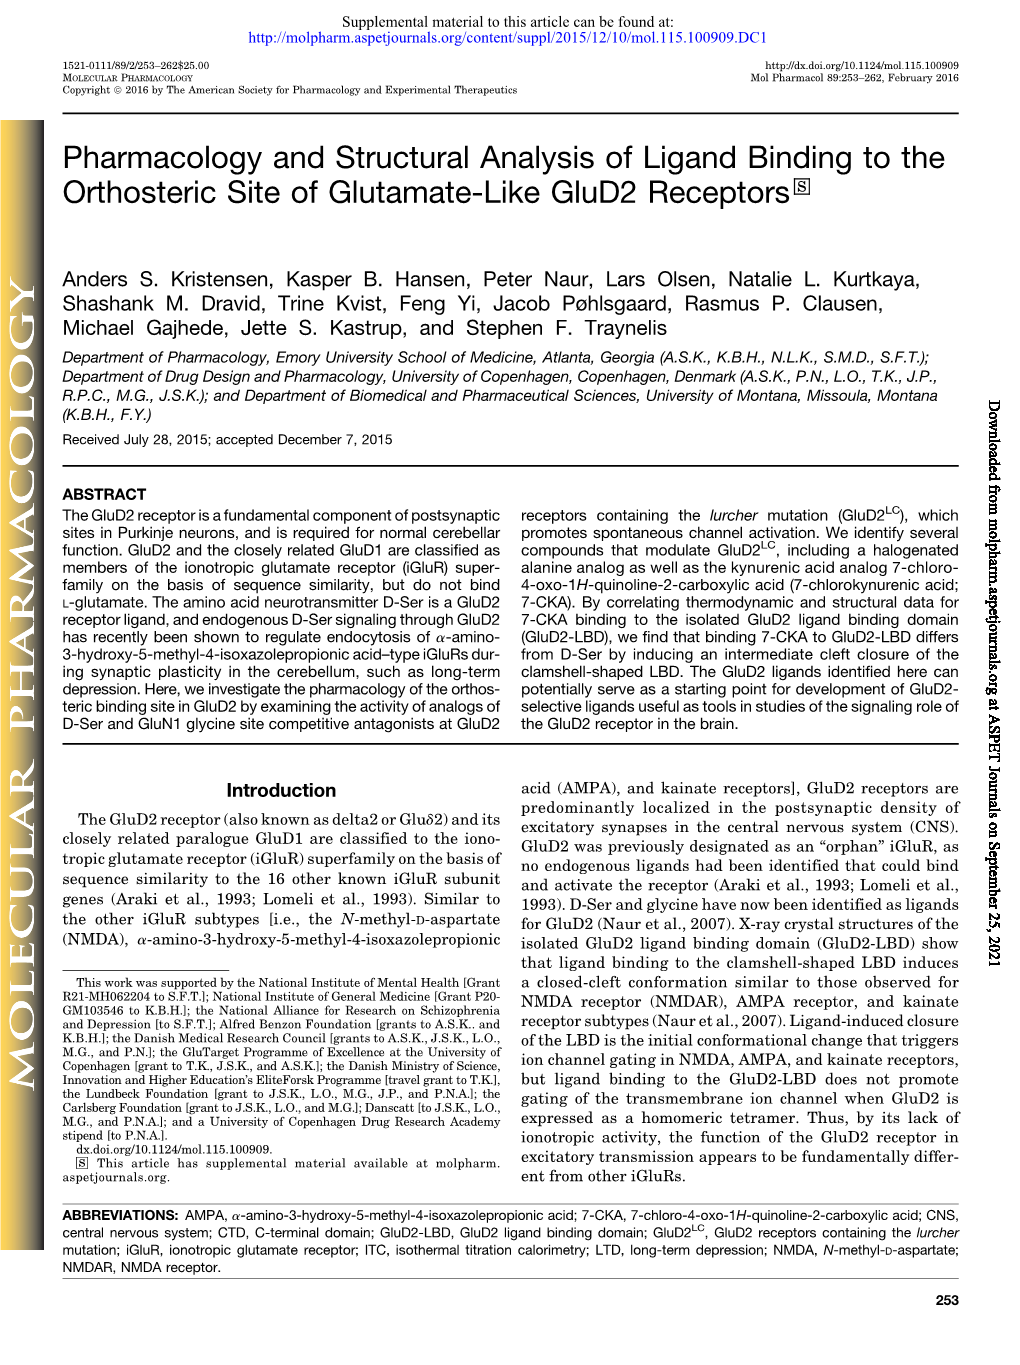 Pharmacology and Structural Analysis of Ligand Binding to the Orthosteric Site of Glutamate-Like Glud2 Receptors S